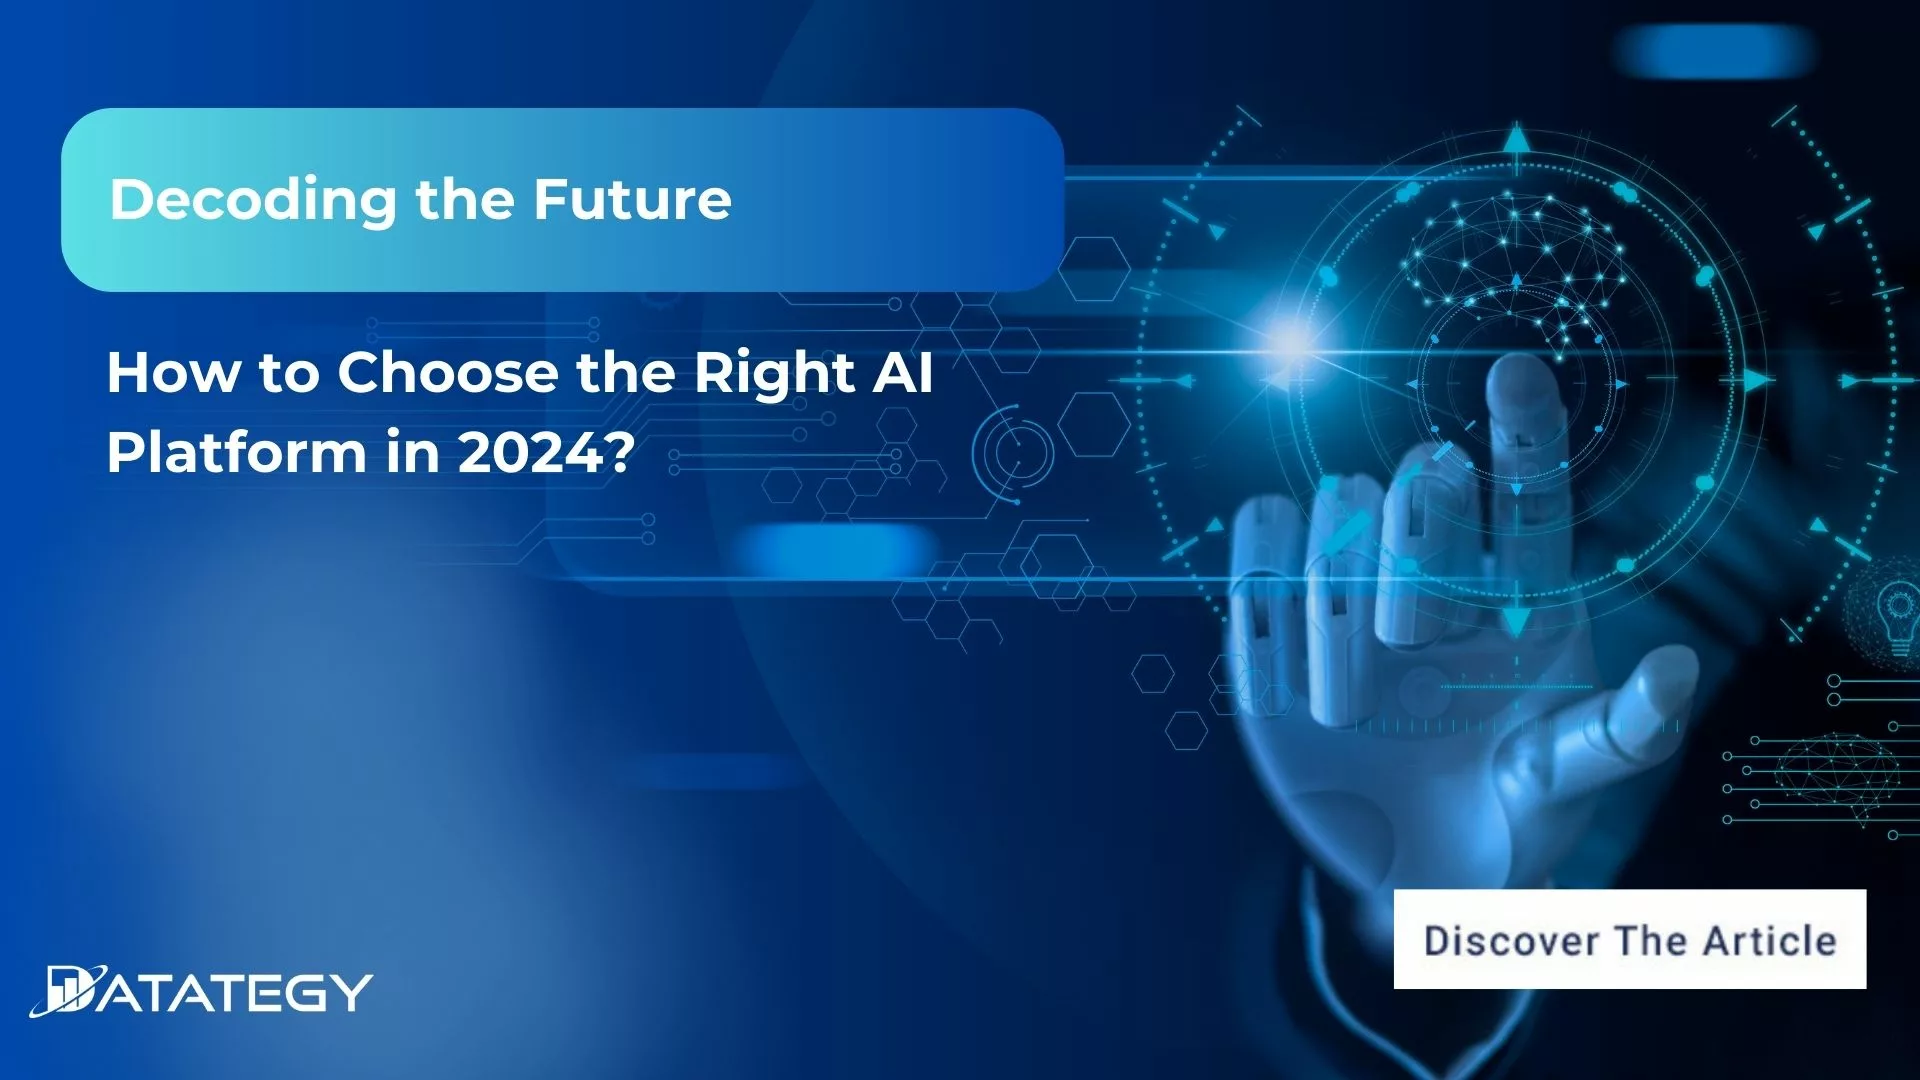 How to choose the right AI platform in 2024?